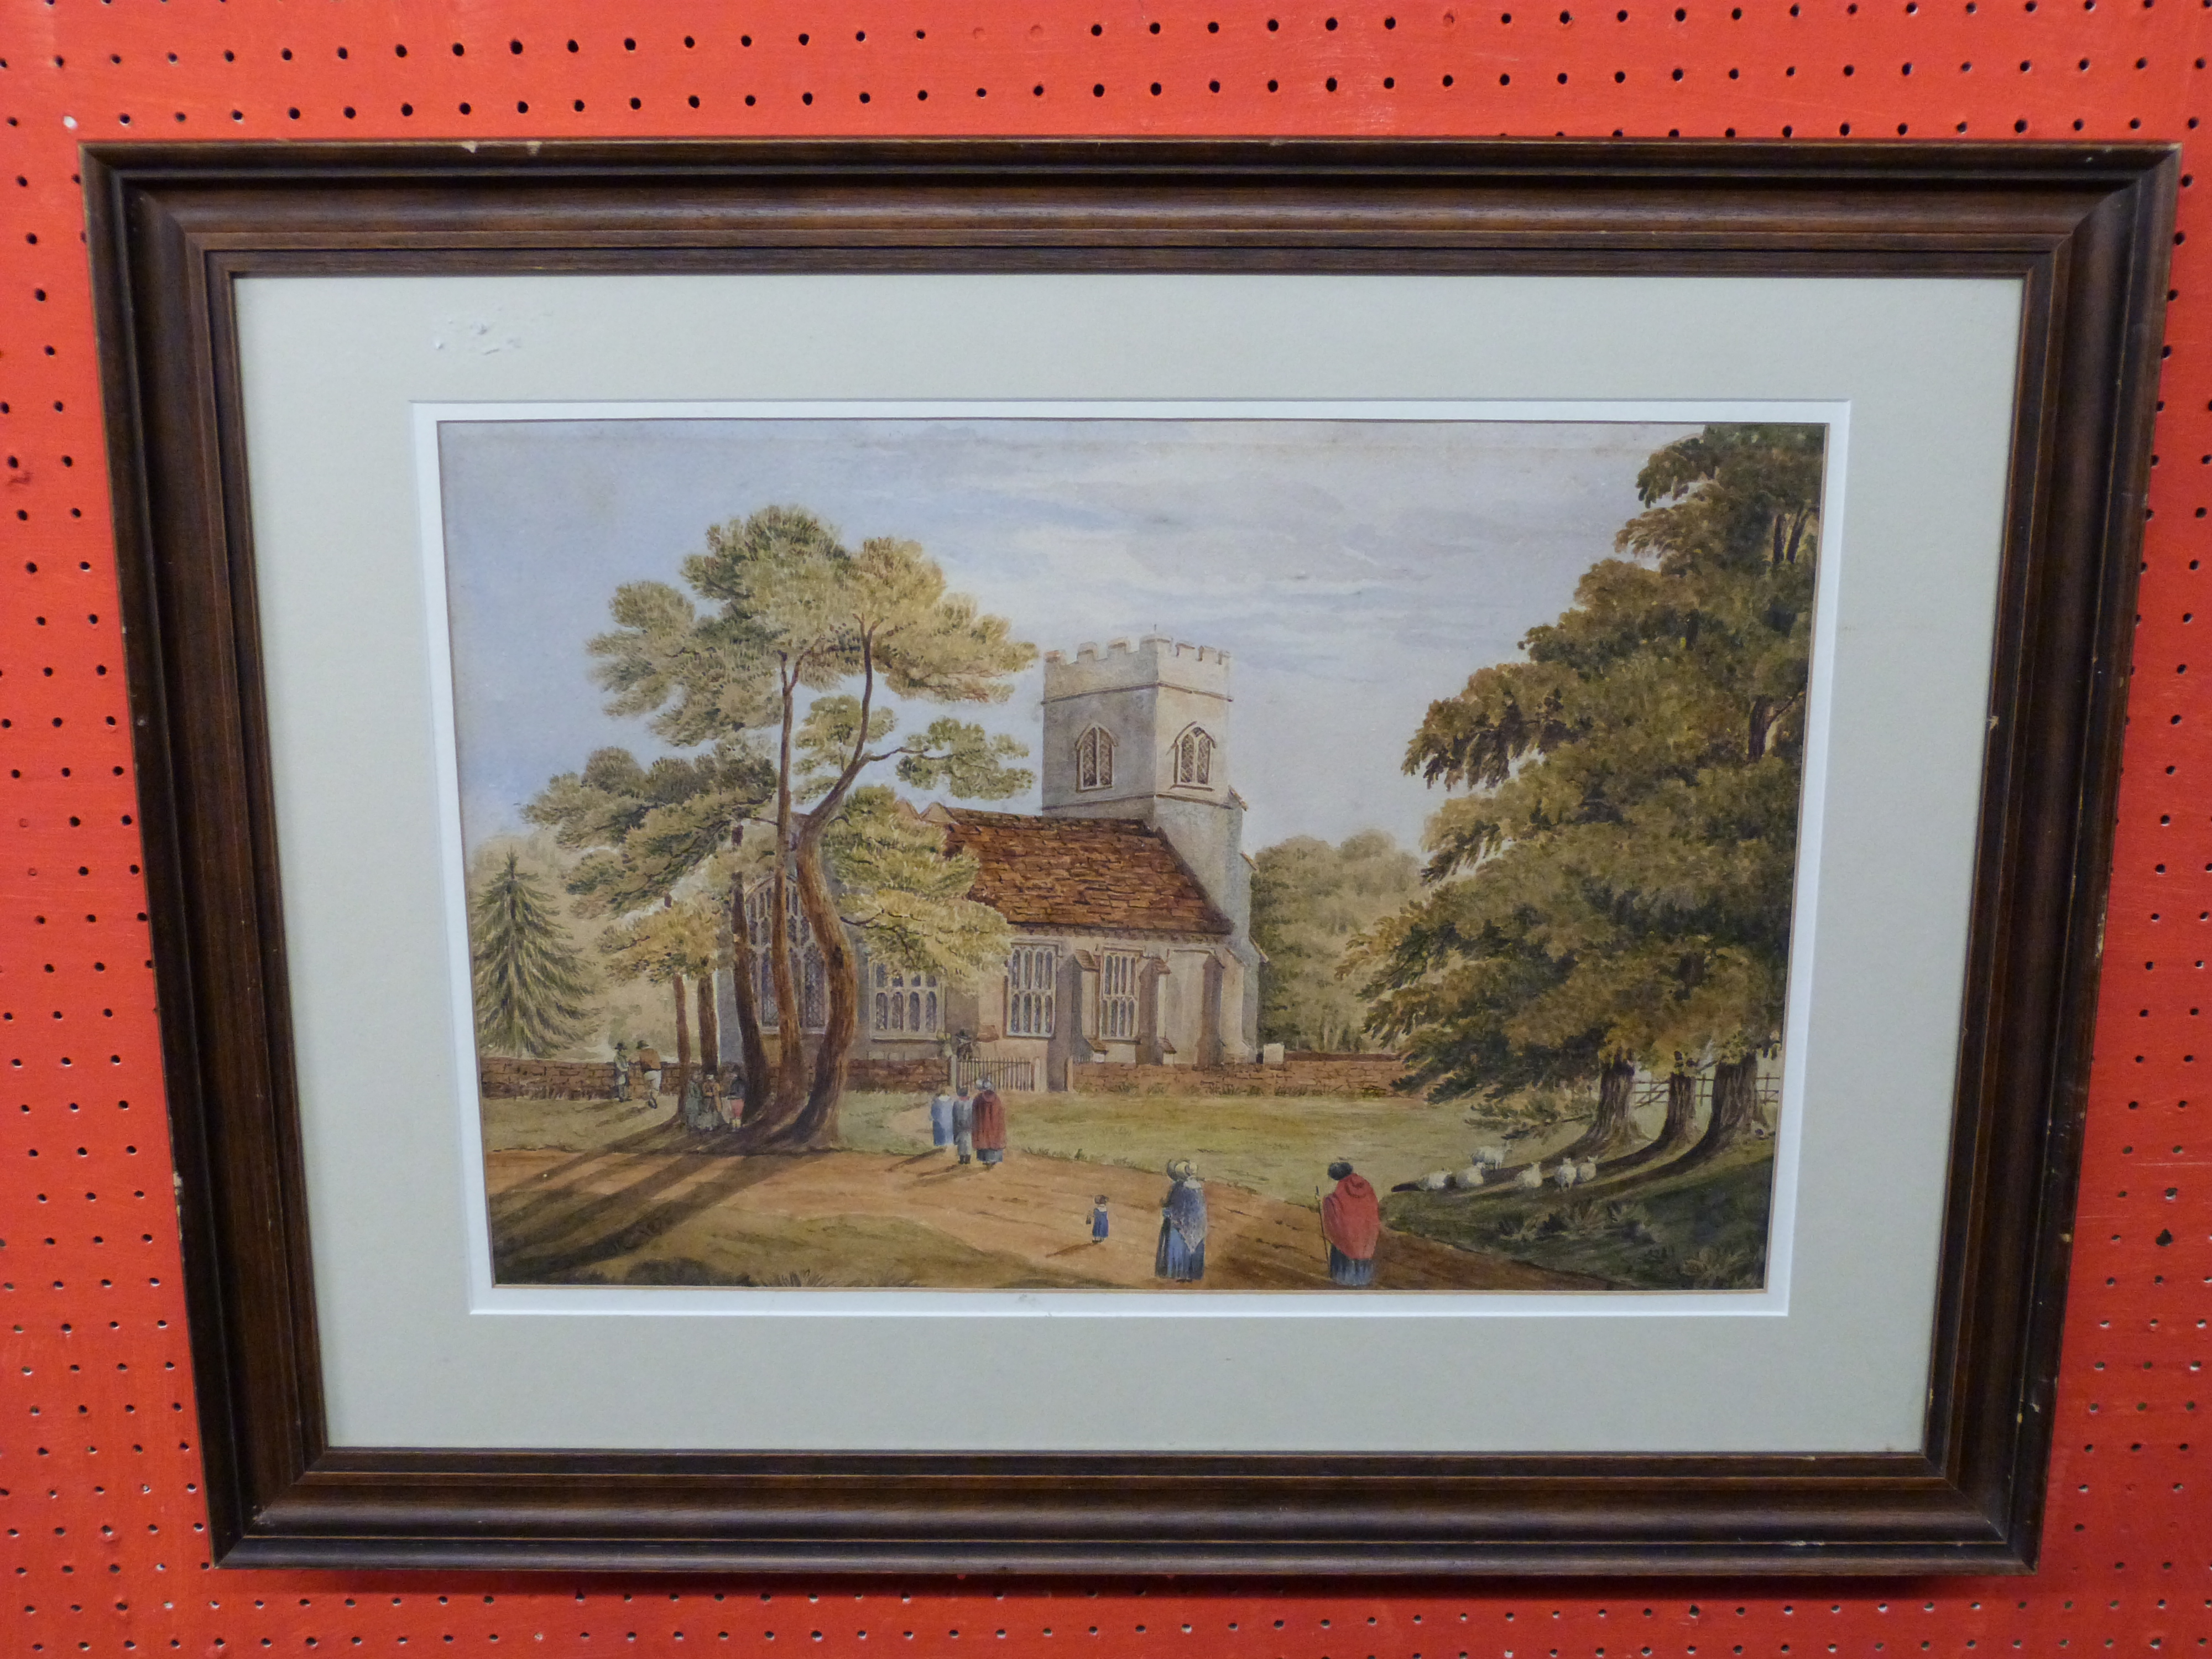 J. Sinclair, Watercolour, signed and dated 1875, Going to Church